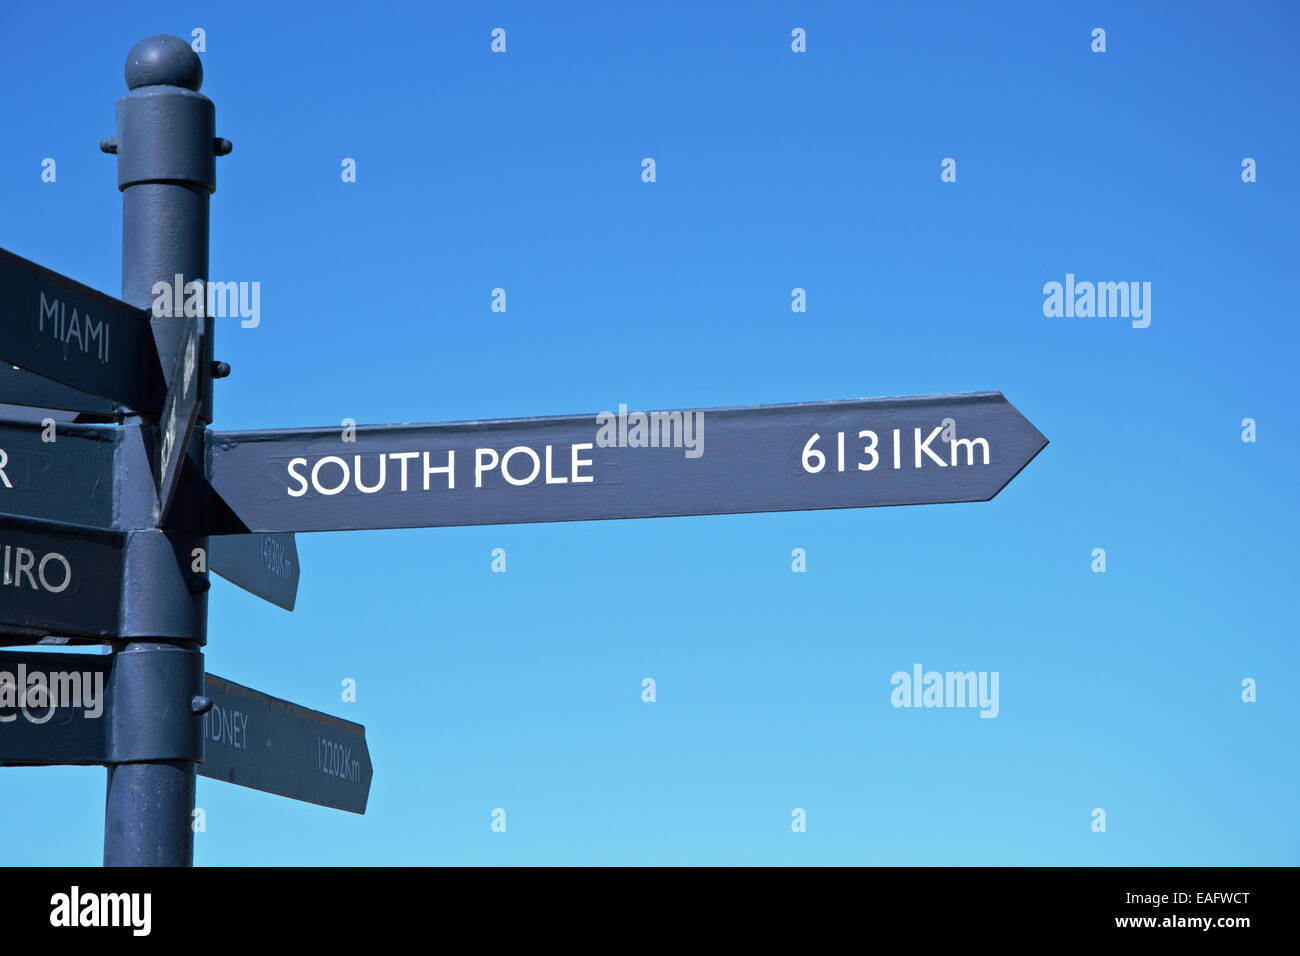 A signpost at the Victoria & Alfred Waterfront with the direction and the distance to the South Pole, Cape Town, South Africa. Stock Photo